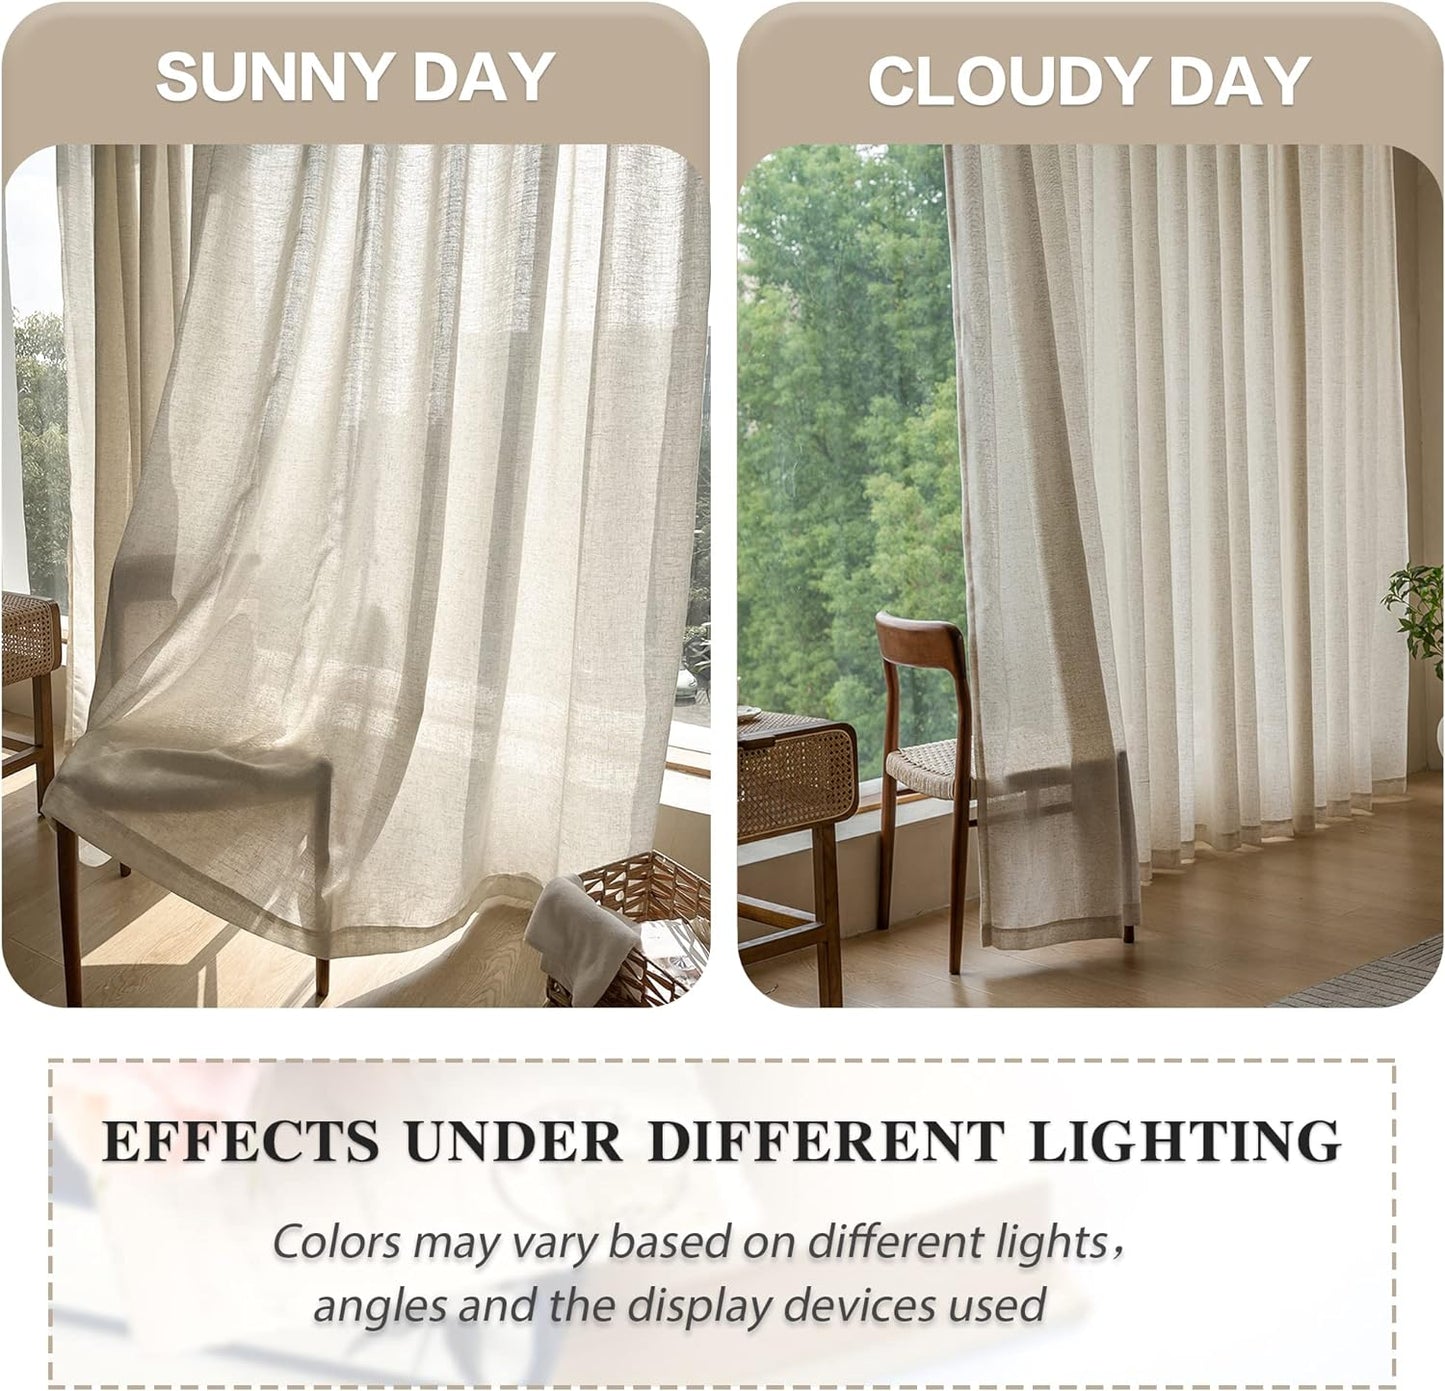 MAIHER Extra Wide Pinch Pleated Drapes 108 Inches Long, Faux Linen Light Filtering Semi Sheer Curtains with Hooks for Living Room Bedroom, Natural Linen (1 Panel, 100 W X 108 L)  MAIHER   